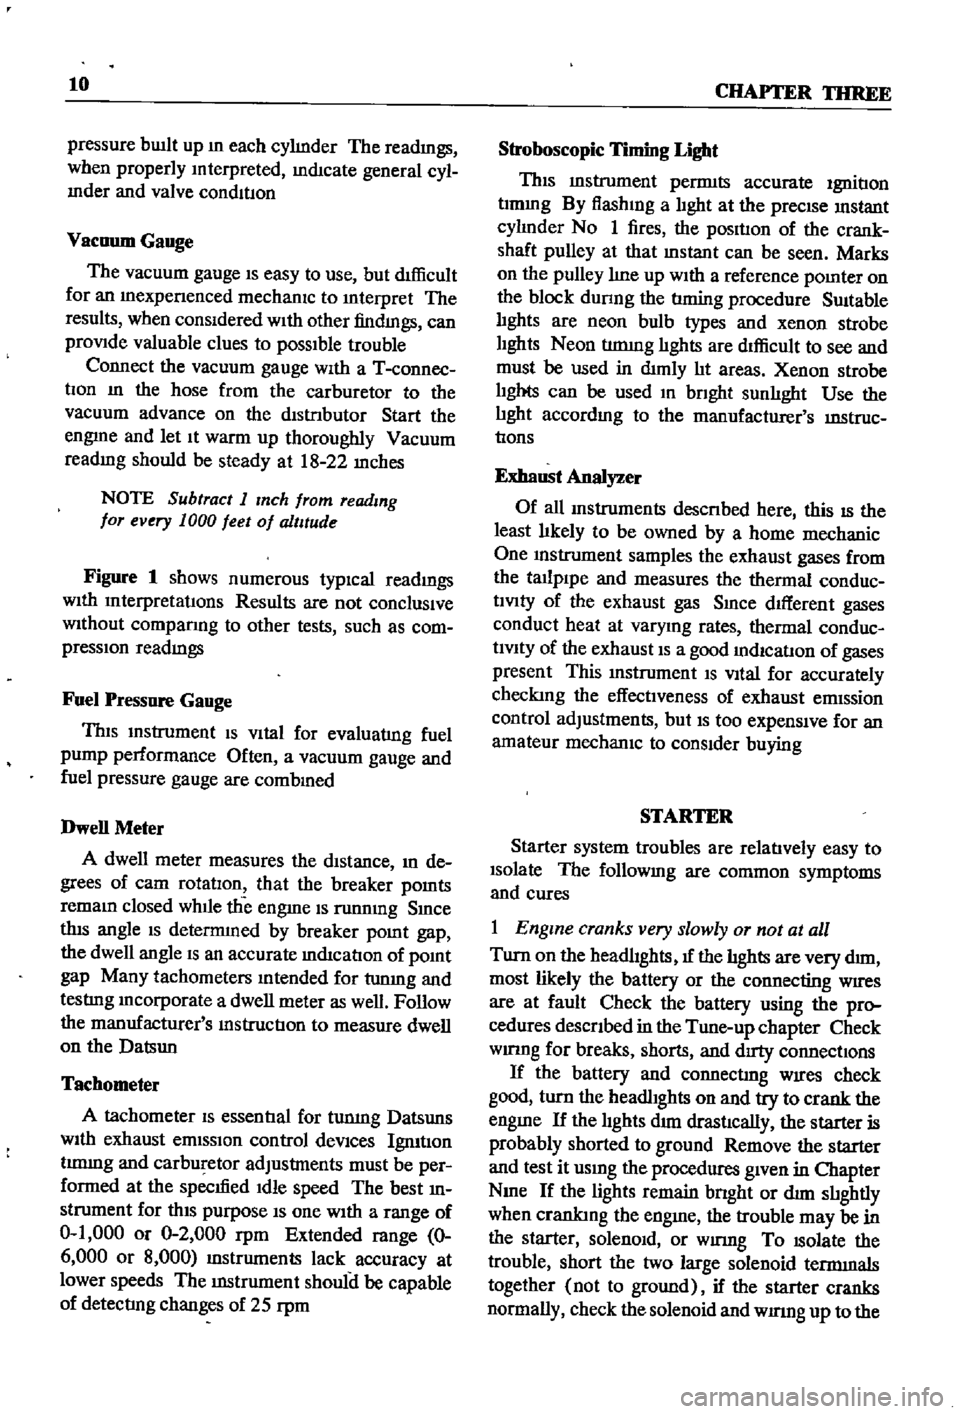 DATSUN 510 1968  Service Repair Manual 
10 
CHAPTER 
THREE

pressure 
bUllt

up 
In 
each

cylInder 
The

readIngs

when

properly 
Interpreted 
IndIcate

general 
cyl

Inder 
and 
valve 
condltlOn

Vacuum

Gauge

The 
vacuum

gauge 
IS

e